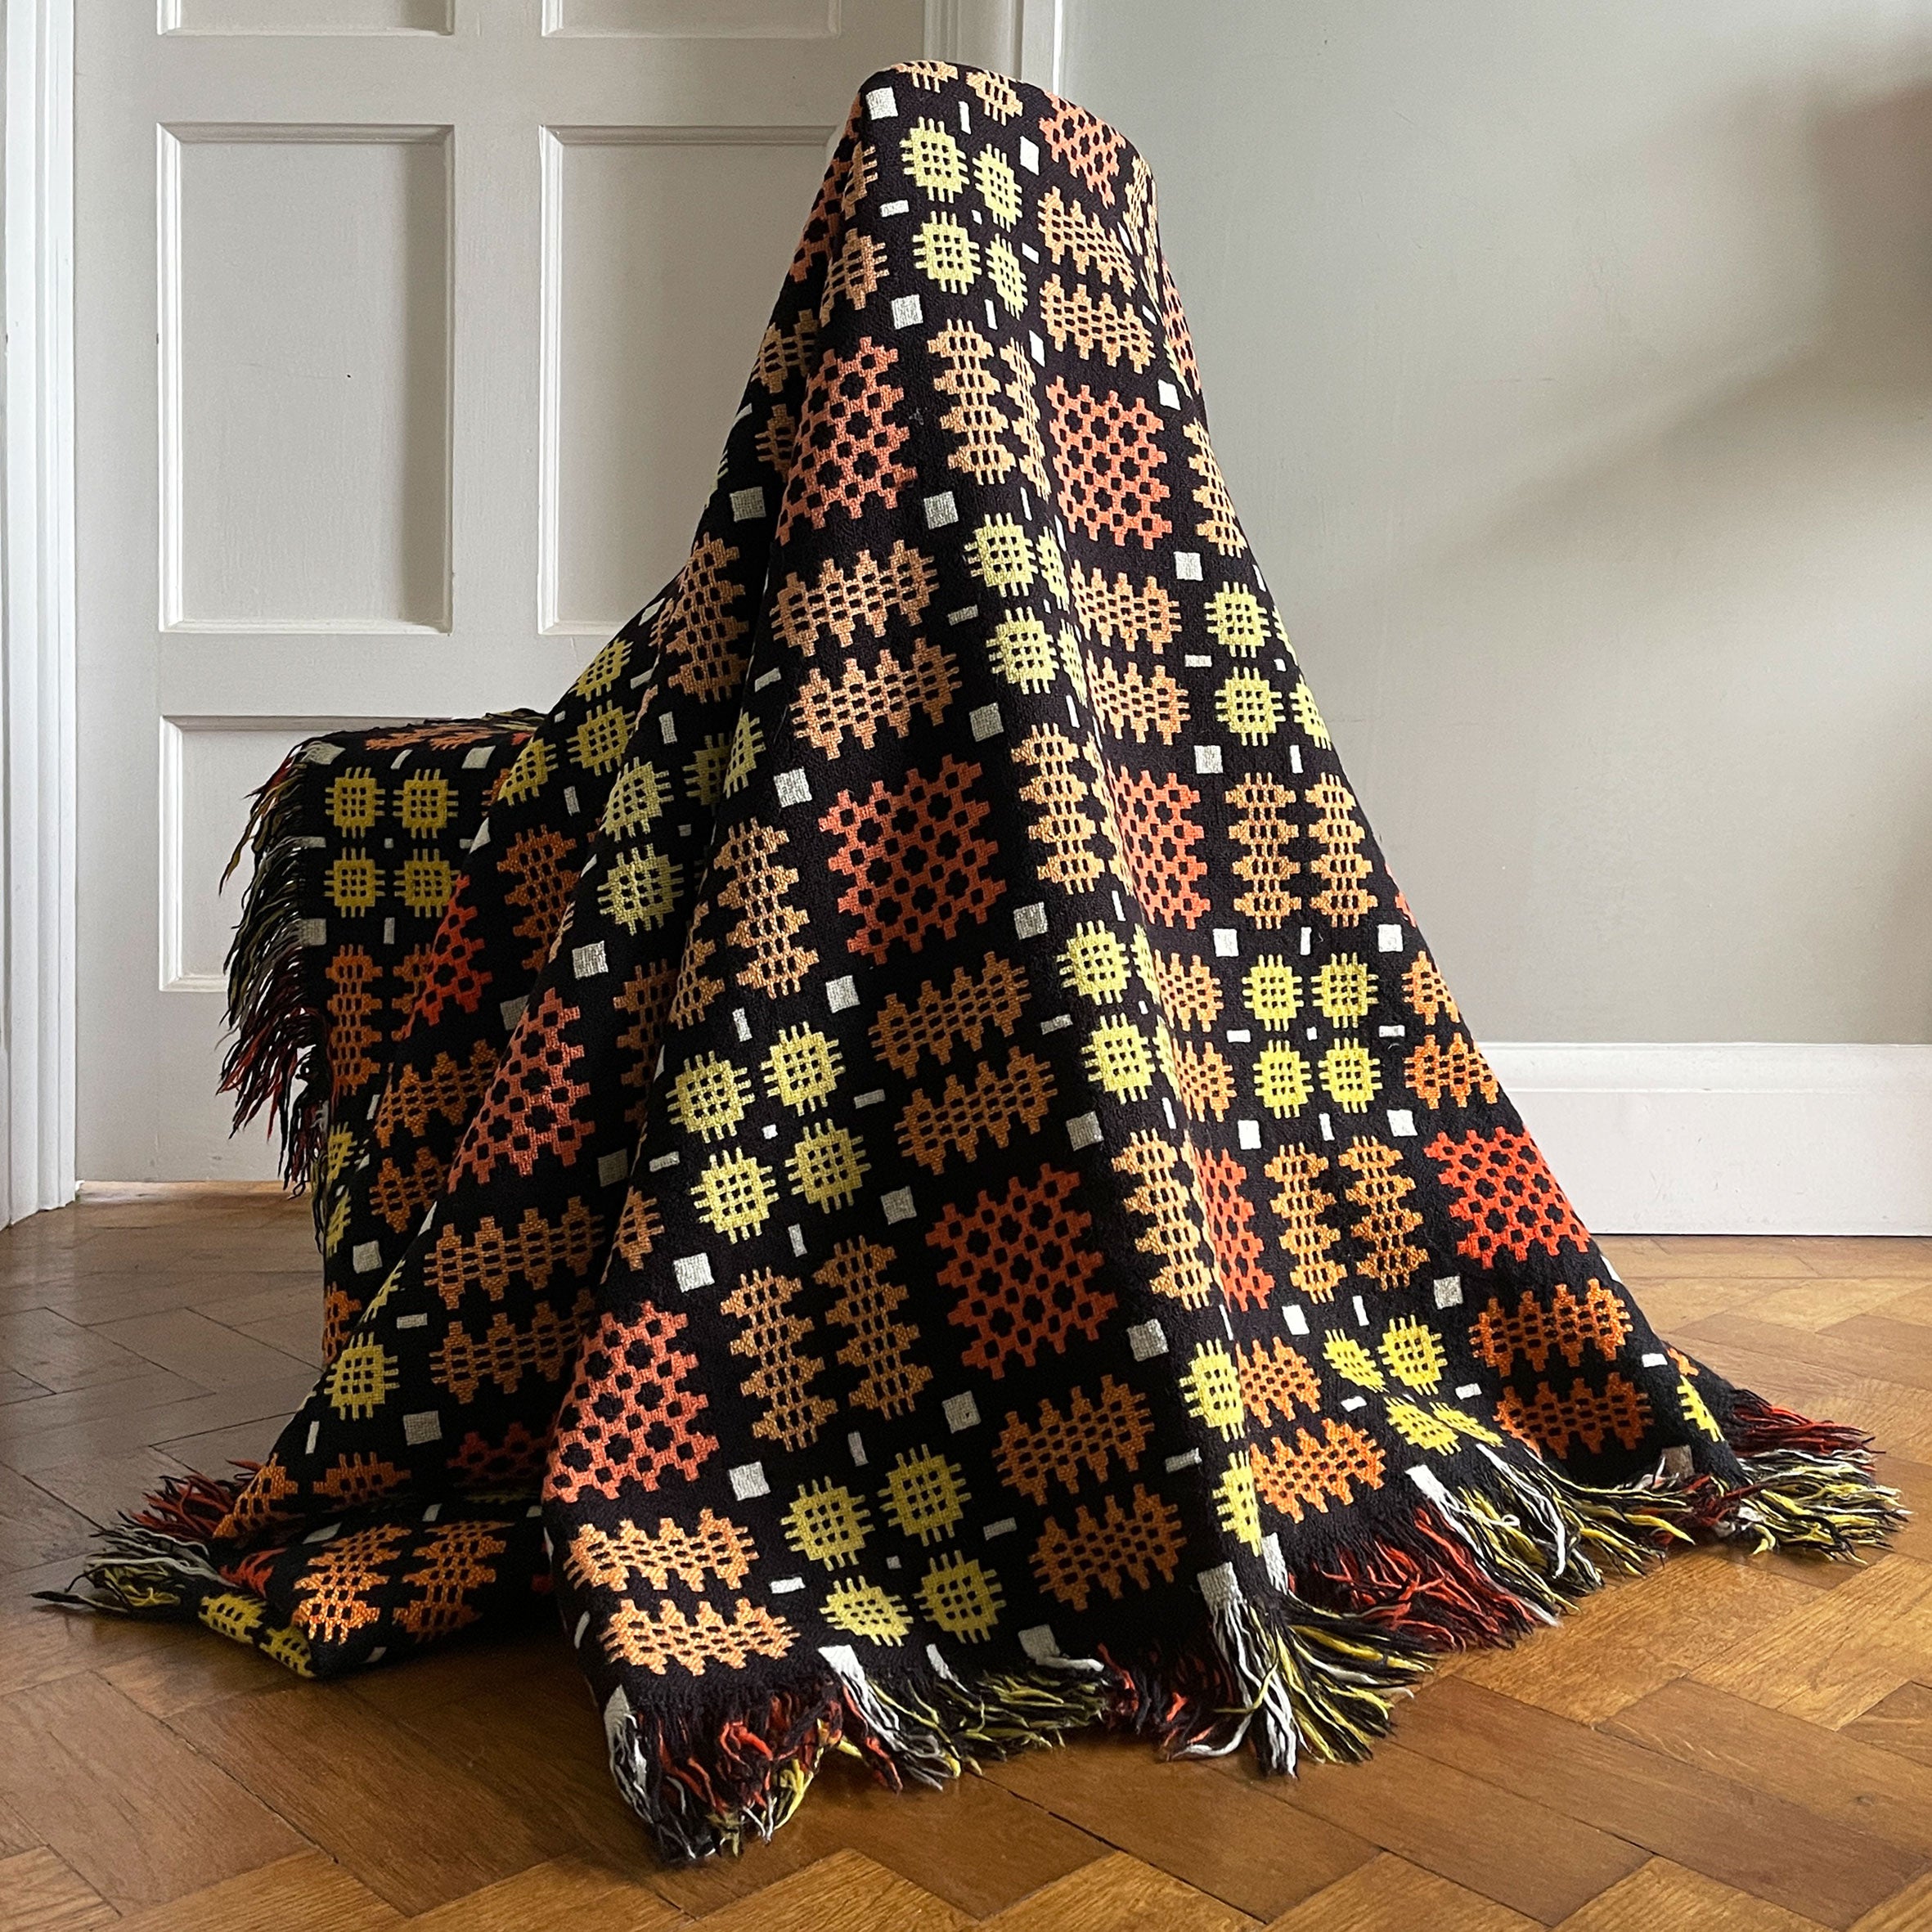 A pure wool Welsh Tapestry blanket in Black, Orange, Red, White and Yellow - SHOP NOW - www.intovintage.co.uk